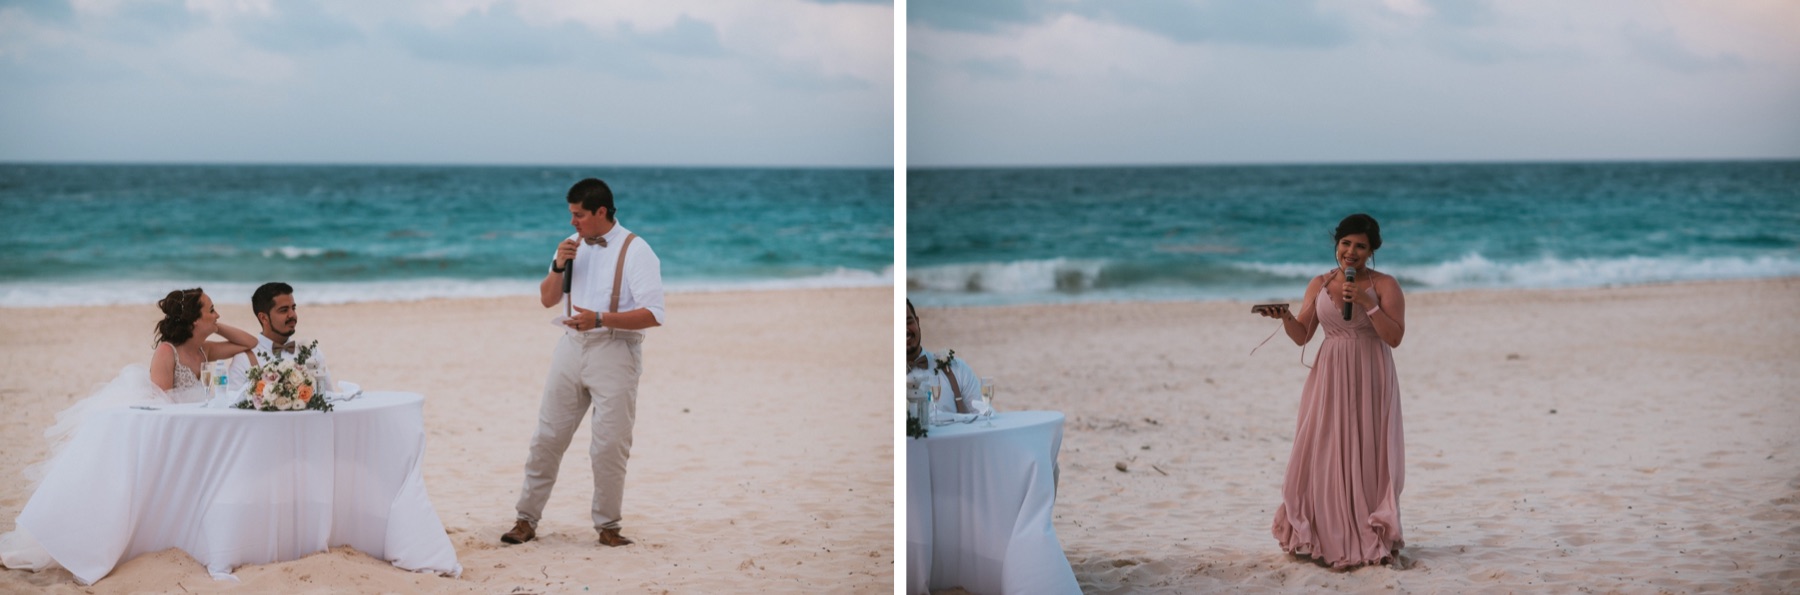 Side by side photos of best man and maid of honor speeches